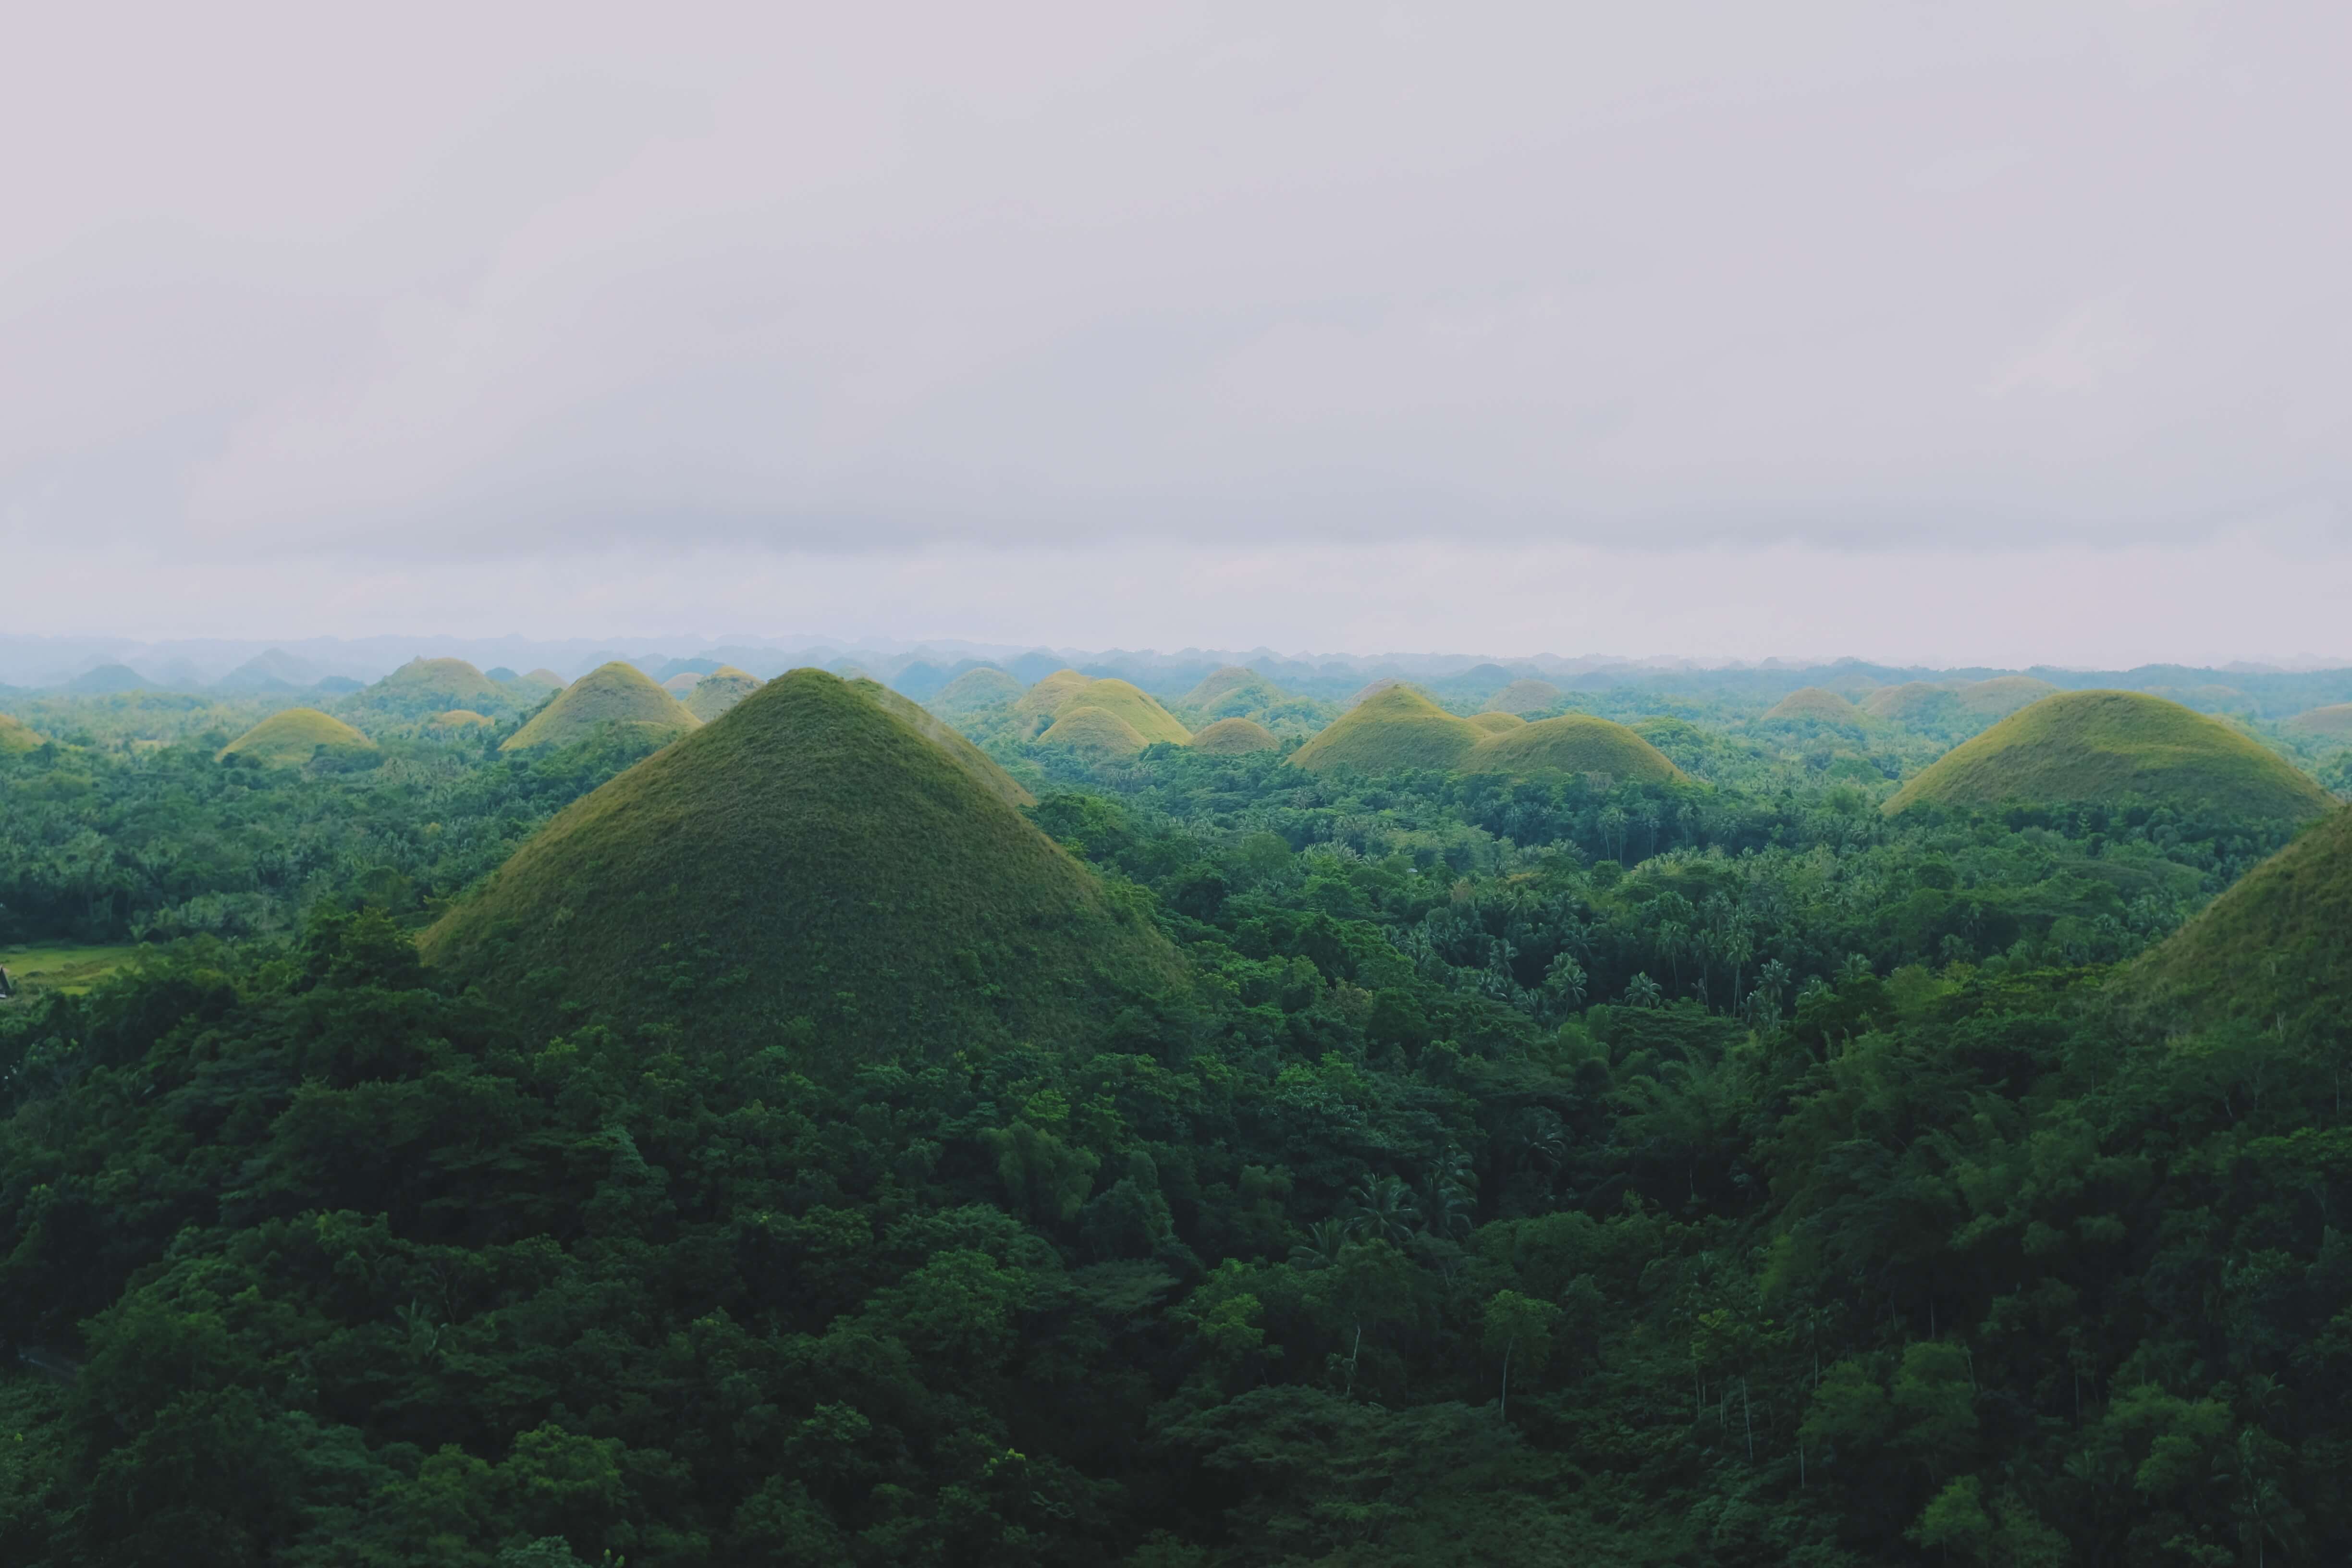 awesome images of the chocolate hills